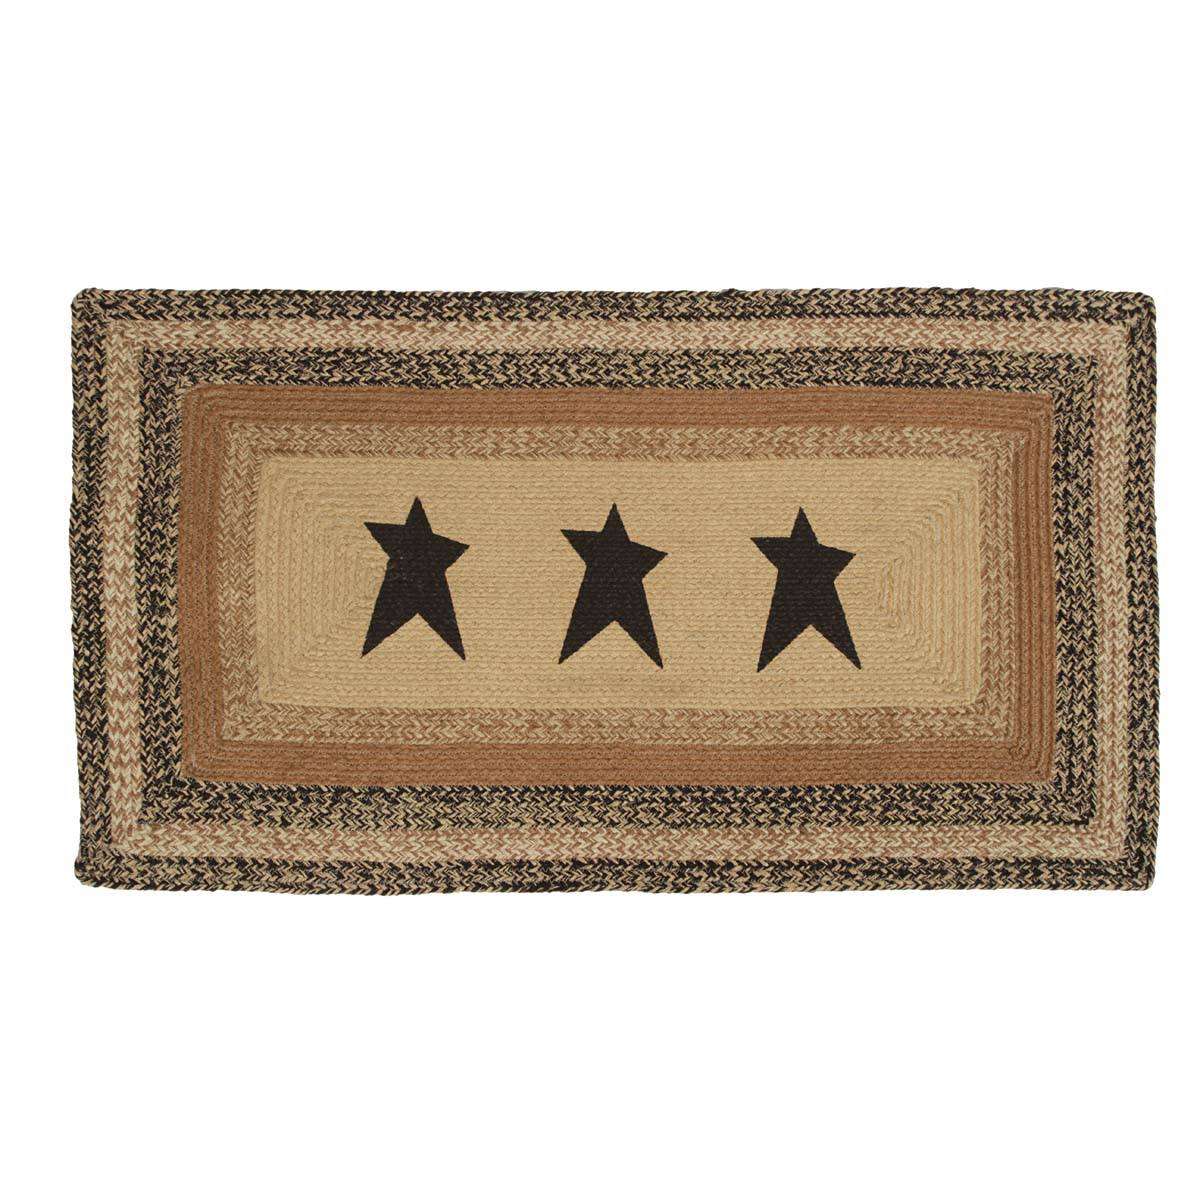 Kettle Grove Jute Braided Rectangle Stencil Star VHC Brands Rugs VHC Brands 27"X48" 